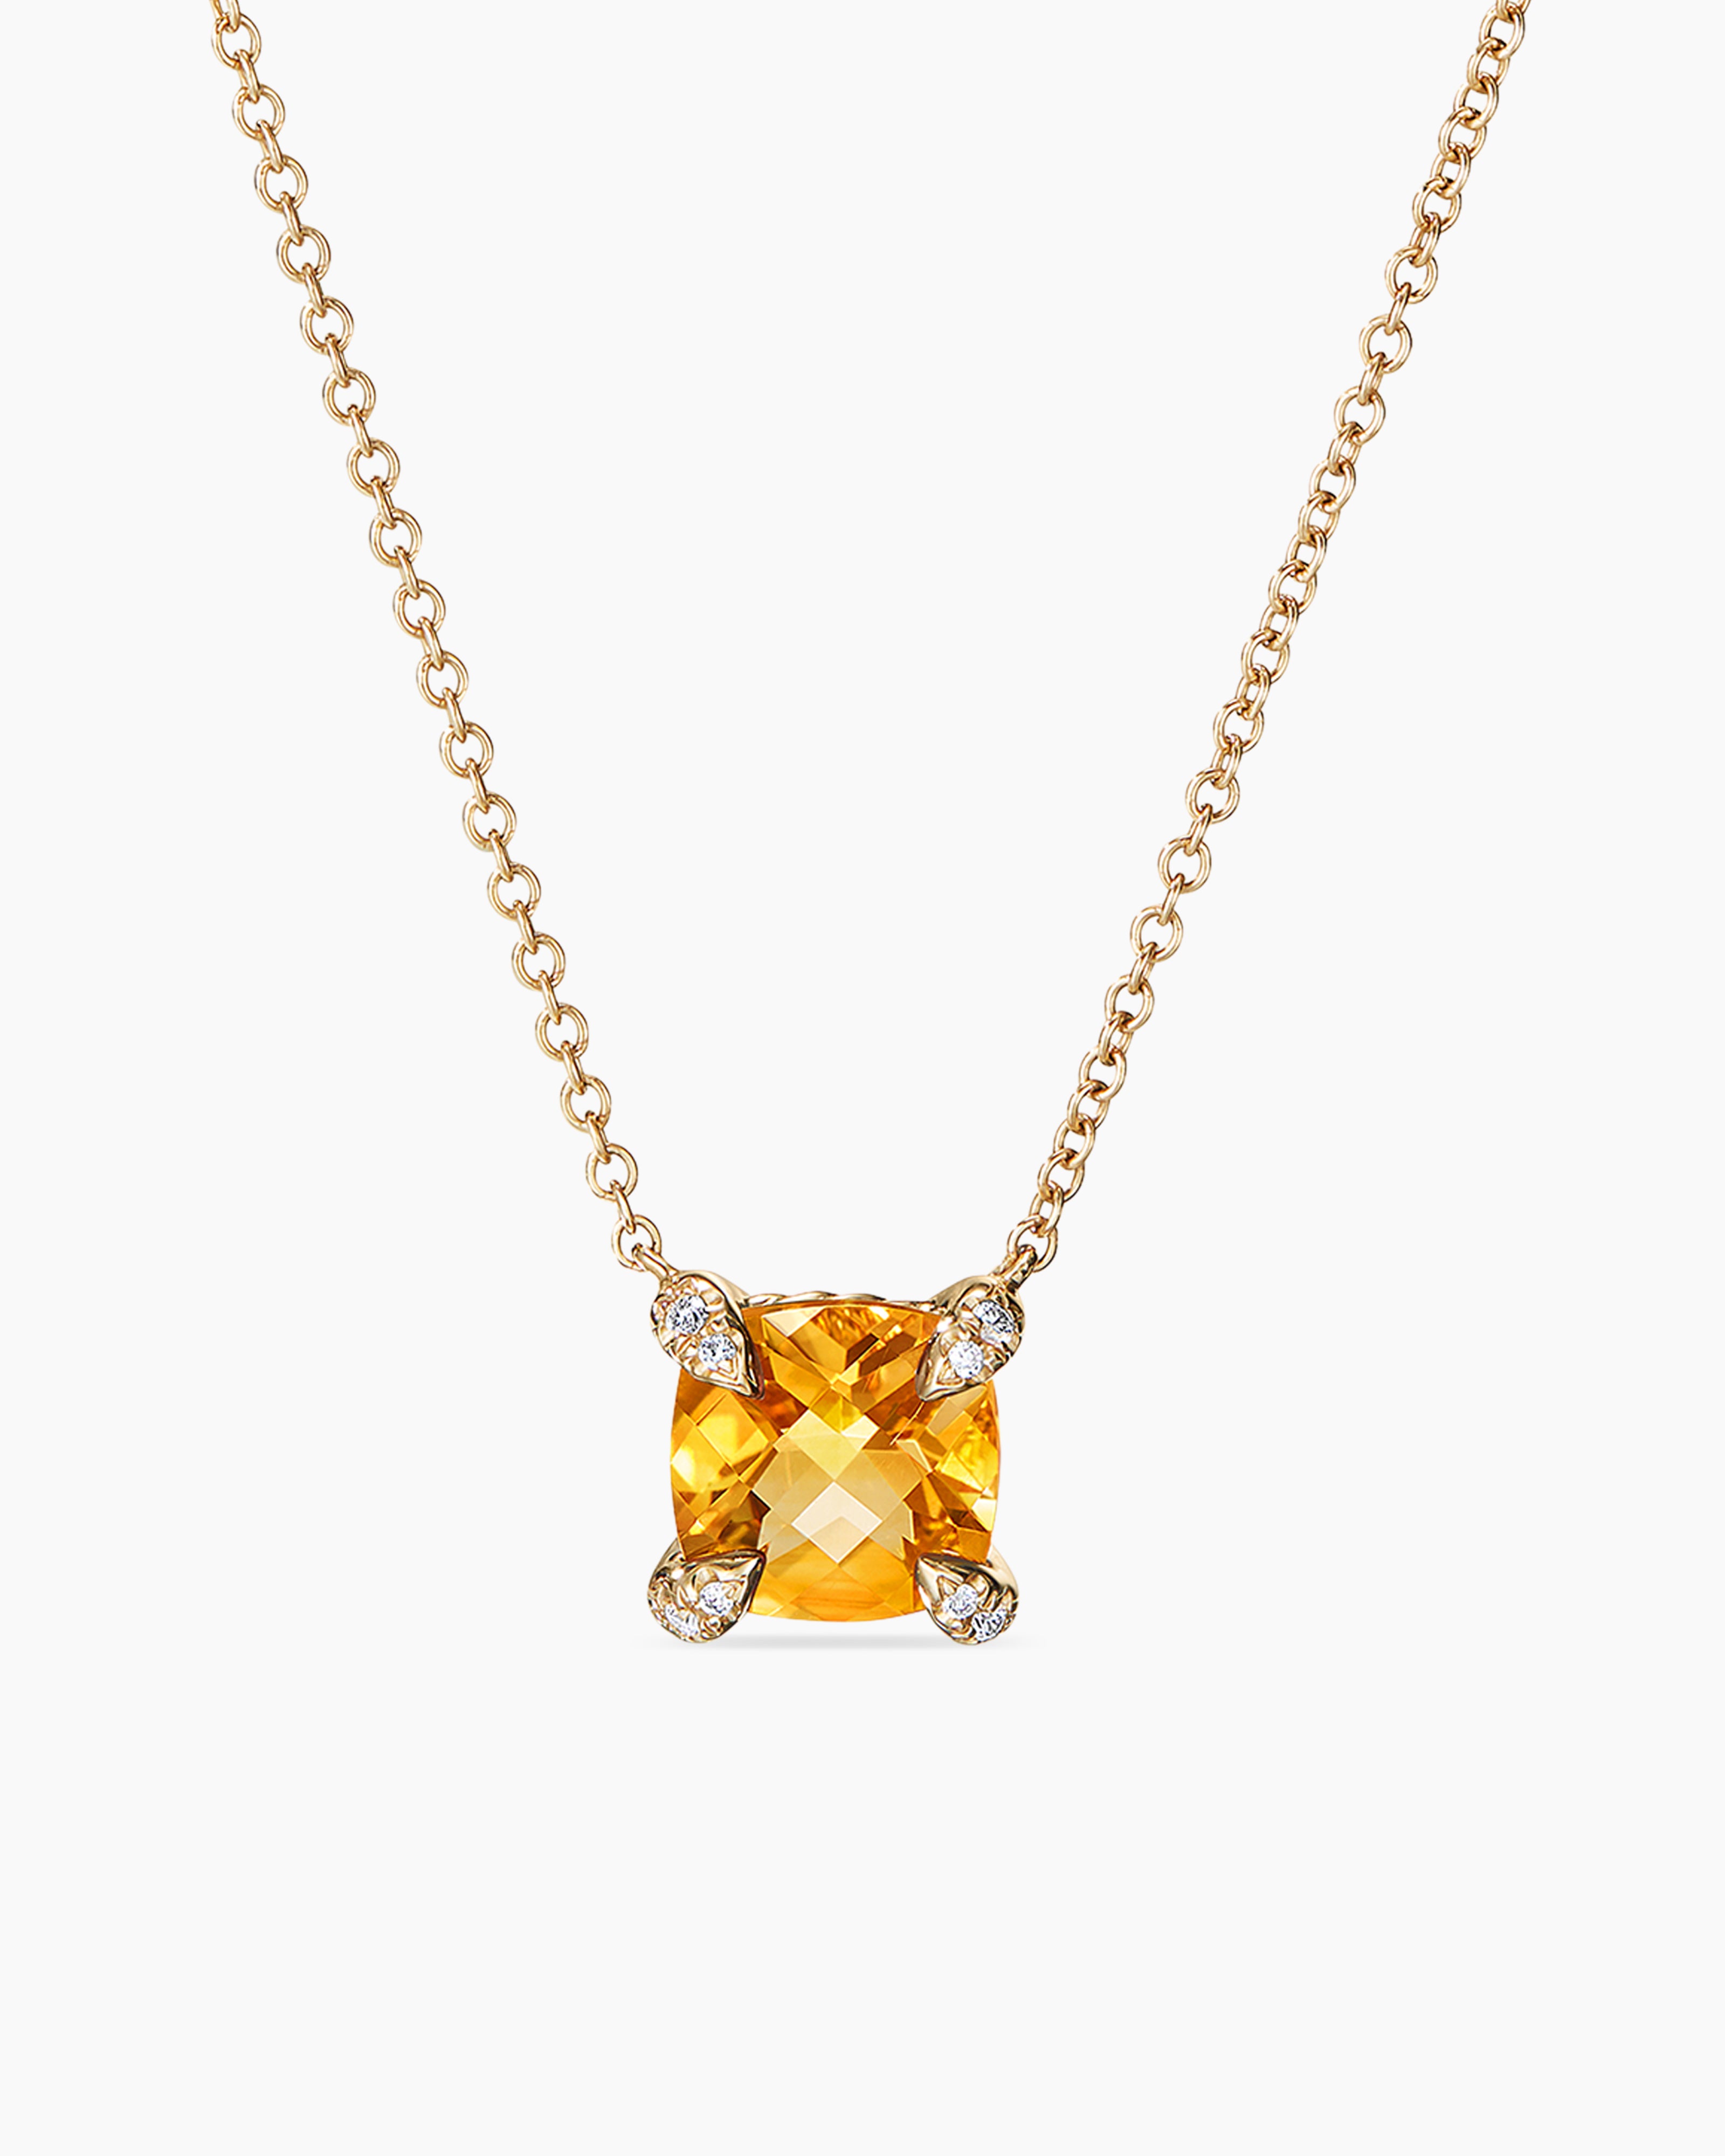 Petite Chatelaine® Pendant Necklace in 18K Yellow Gold with